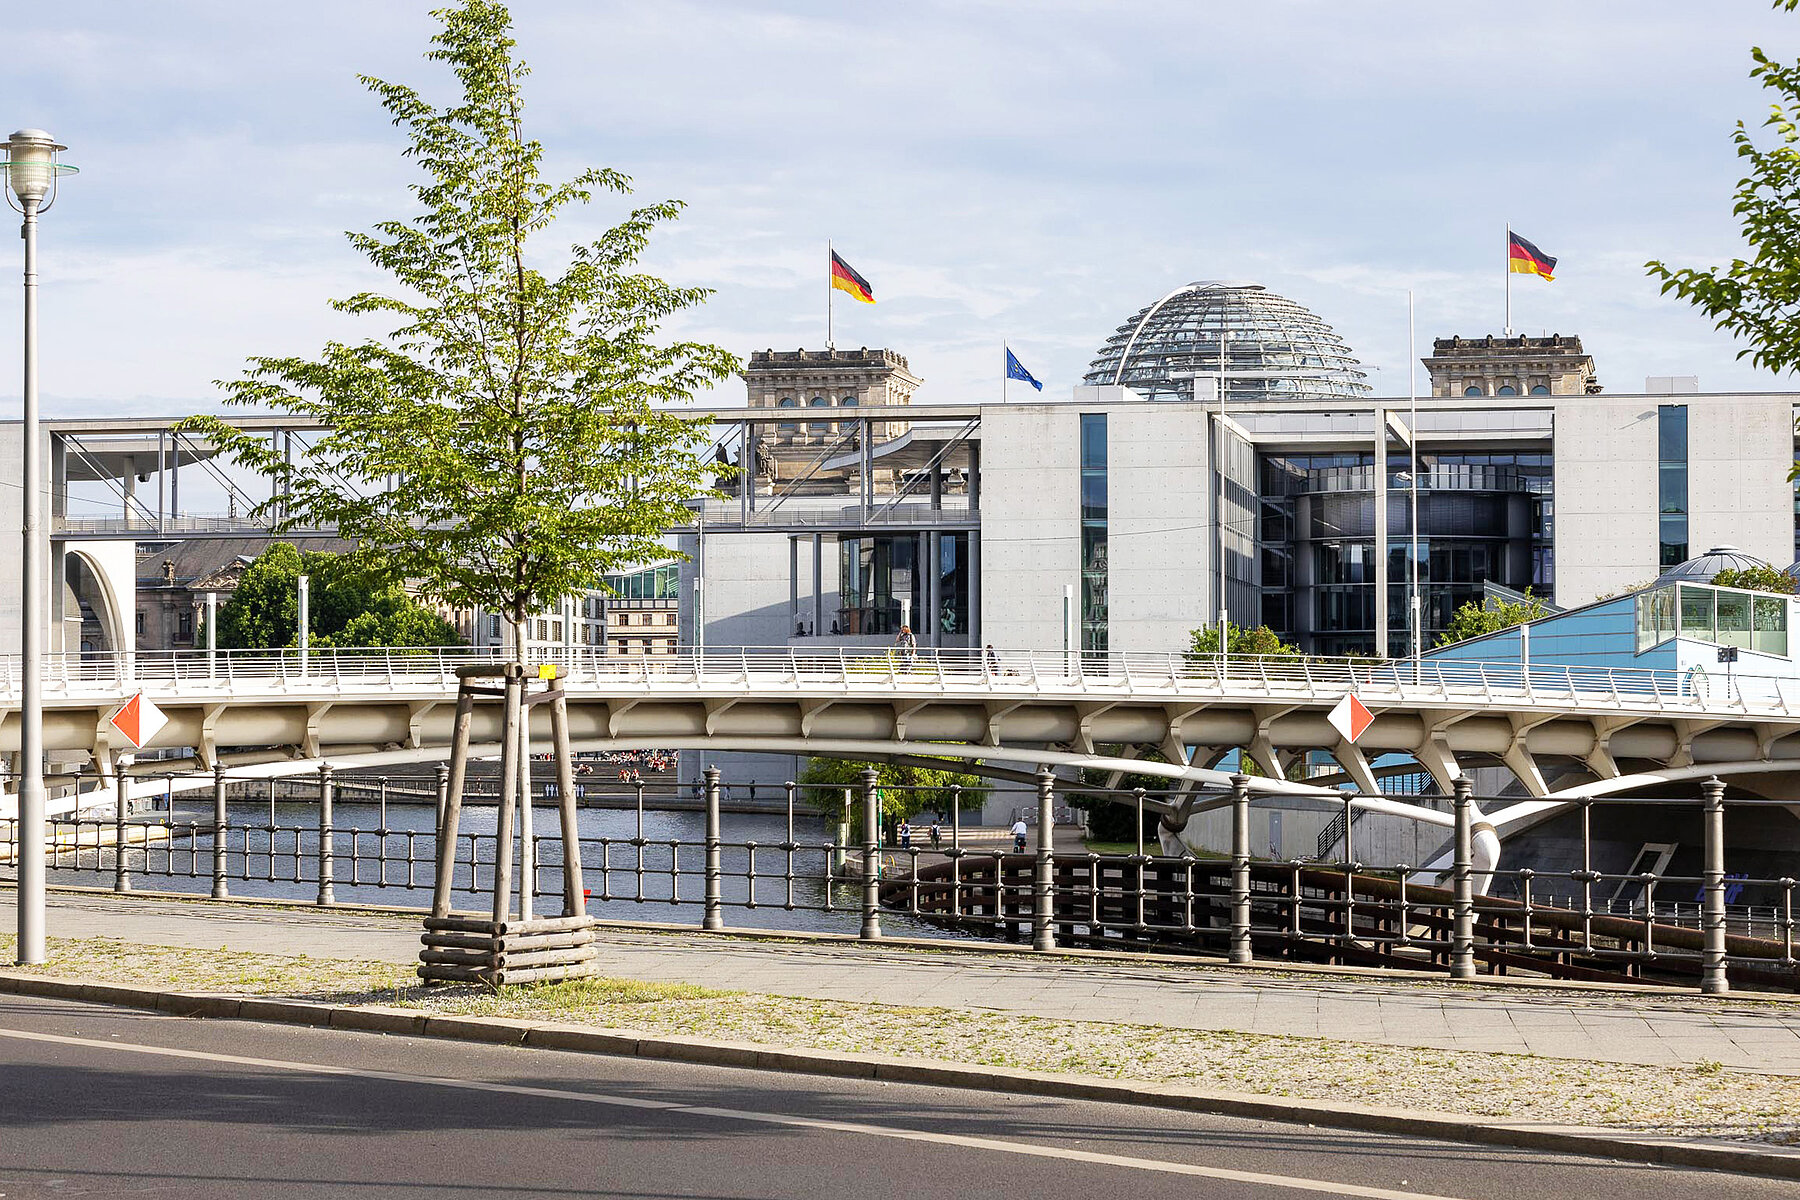 The roof with the dome of the Reichstag protrudes behind a modern government building. In front is the Spree, which is spanned by a bridge.